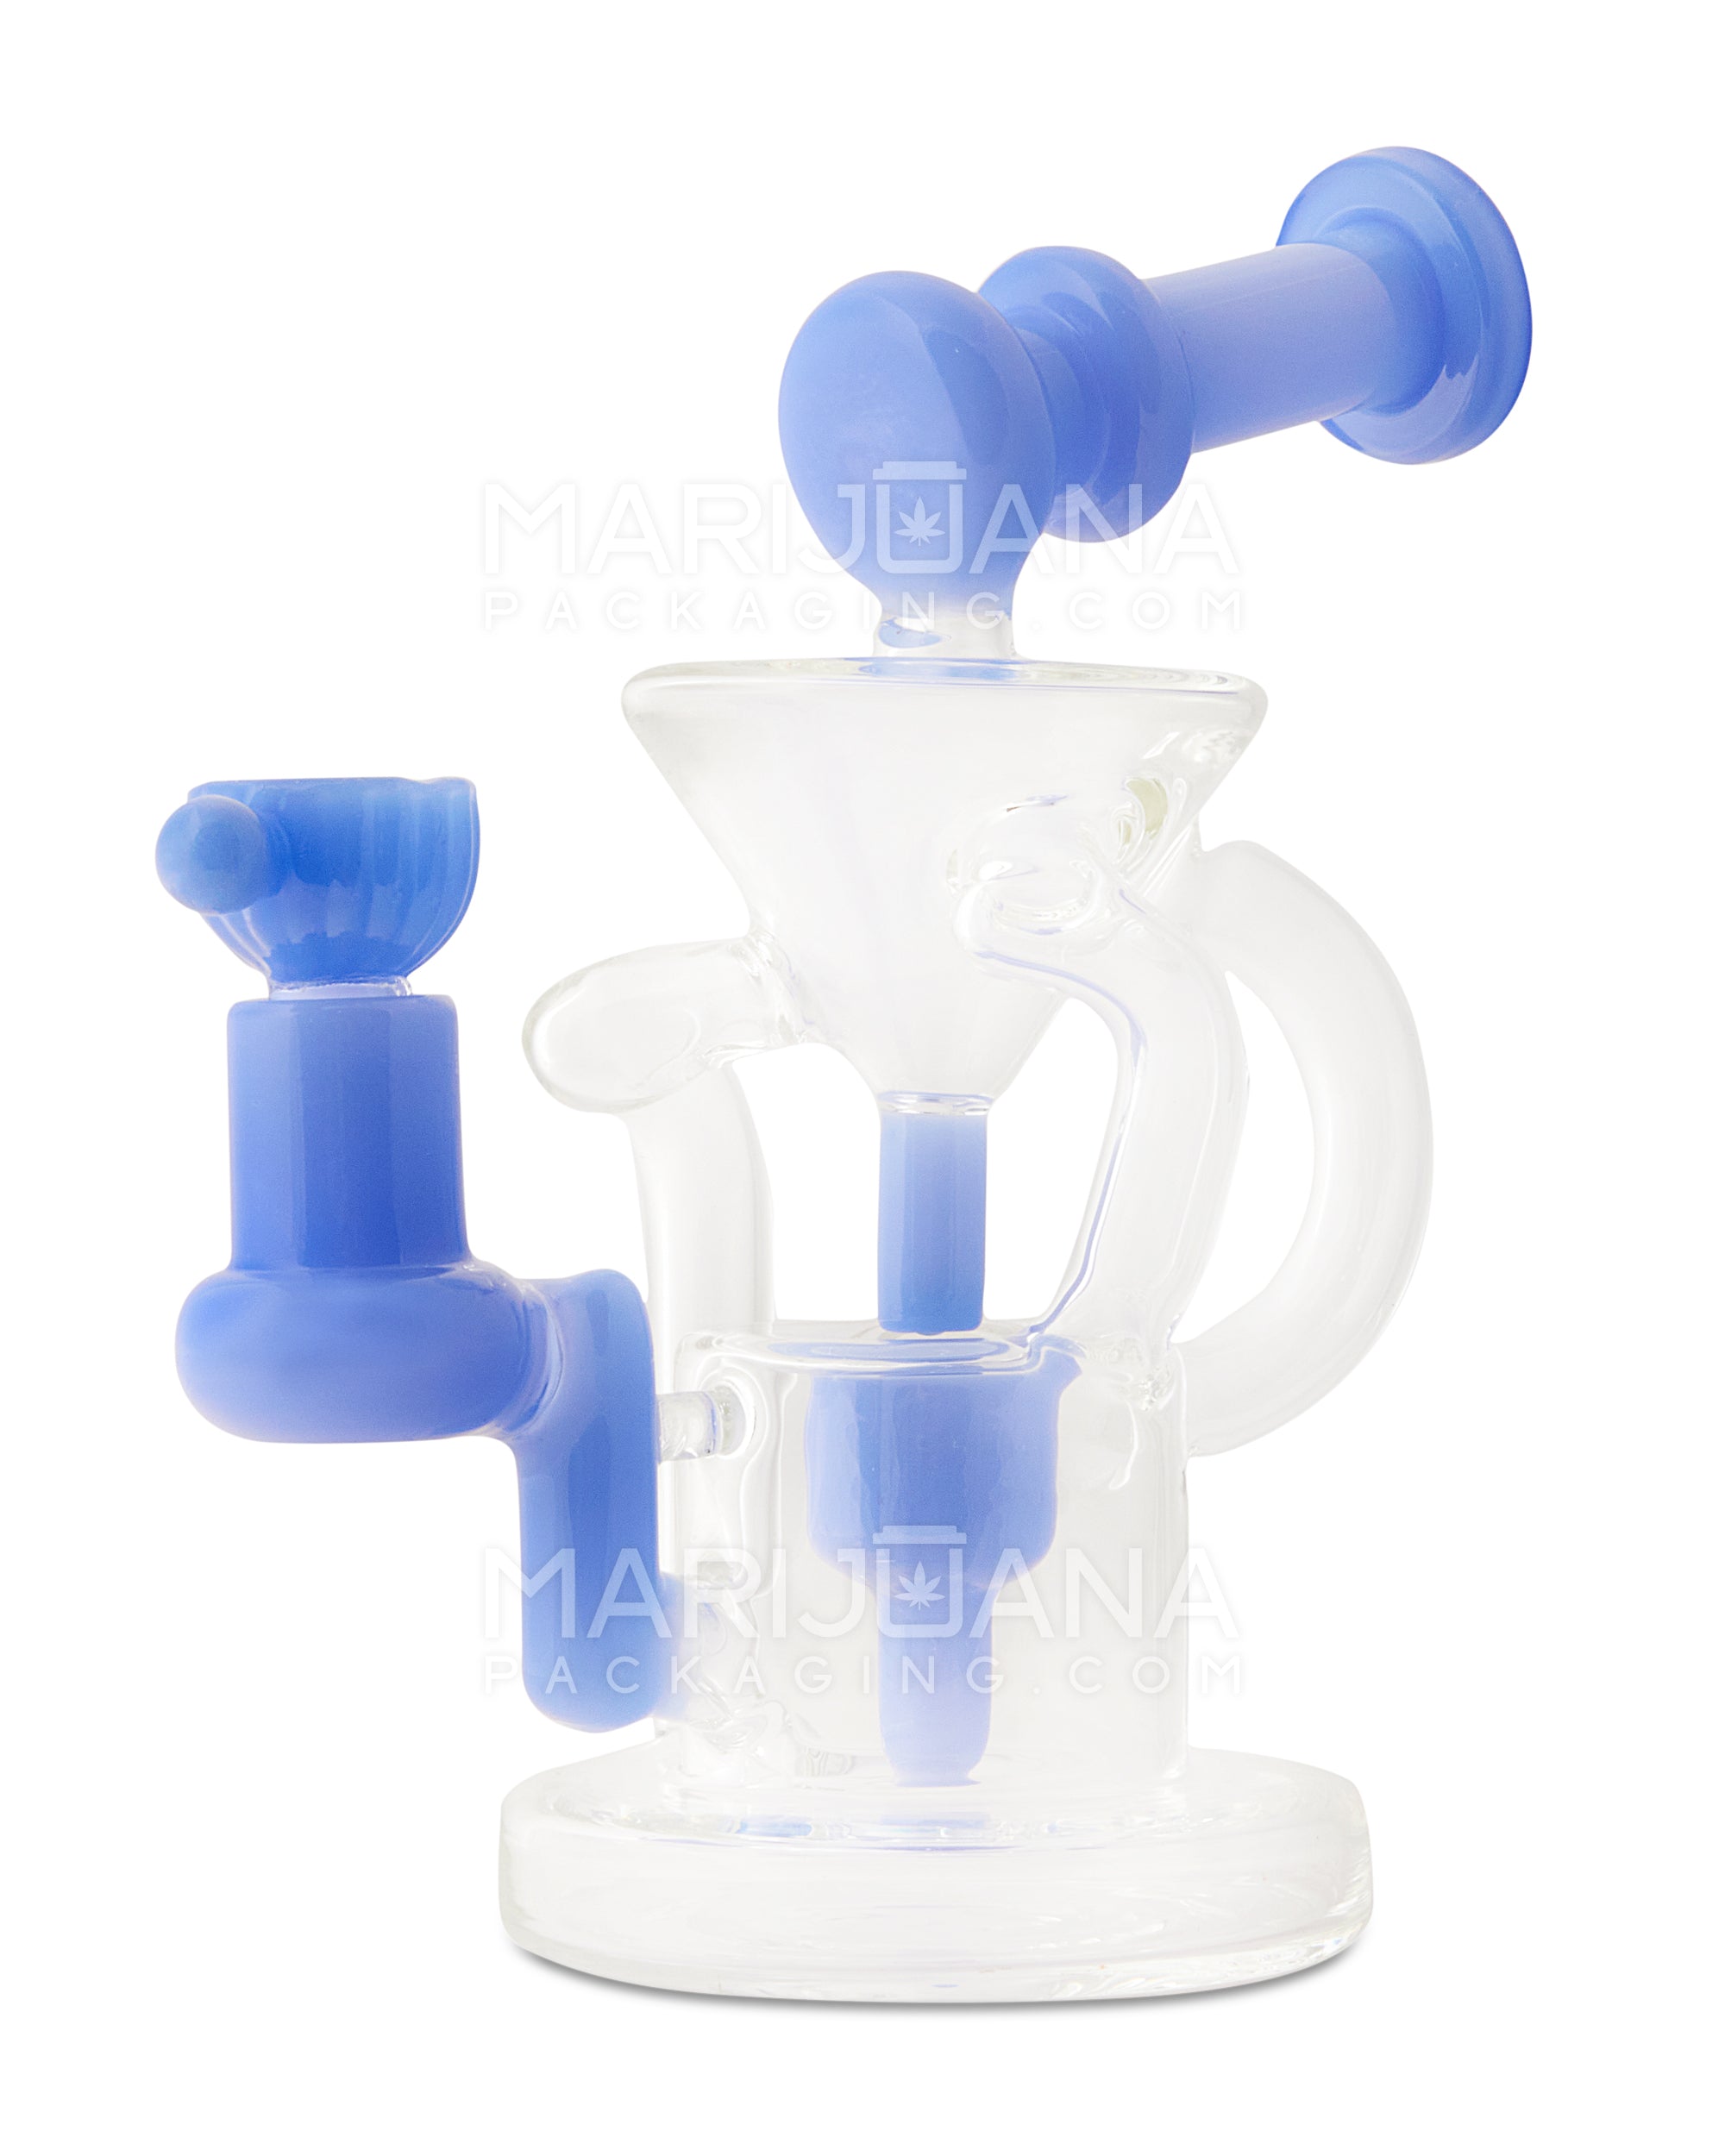 USA Glass | Sidecar Funnel Single Uptake Ball Water Pipe | 6.5in Tall - 14mm Bowl - Blue